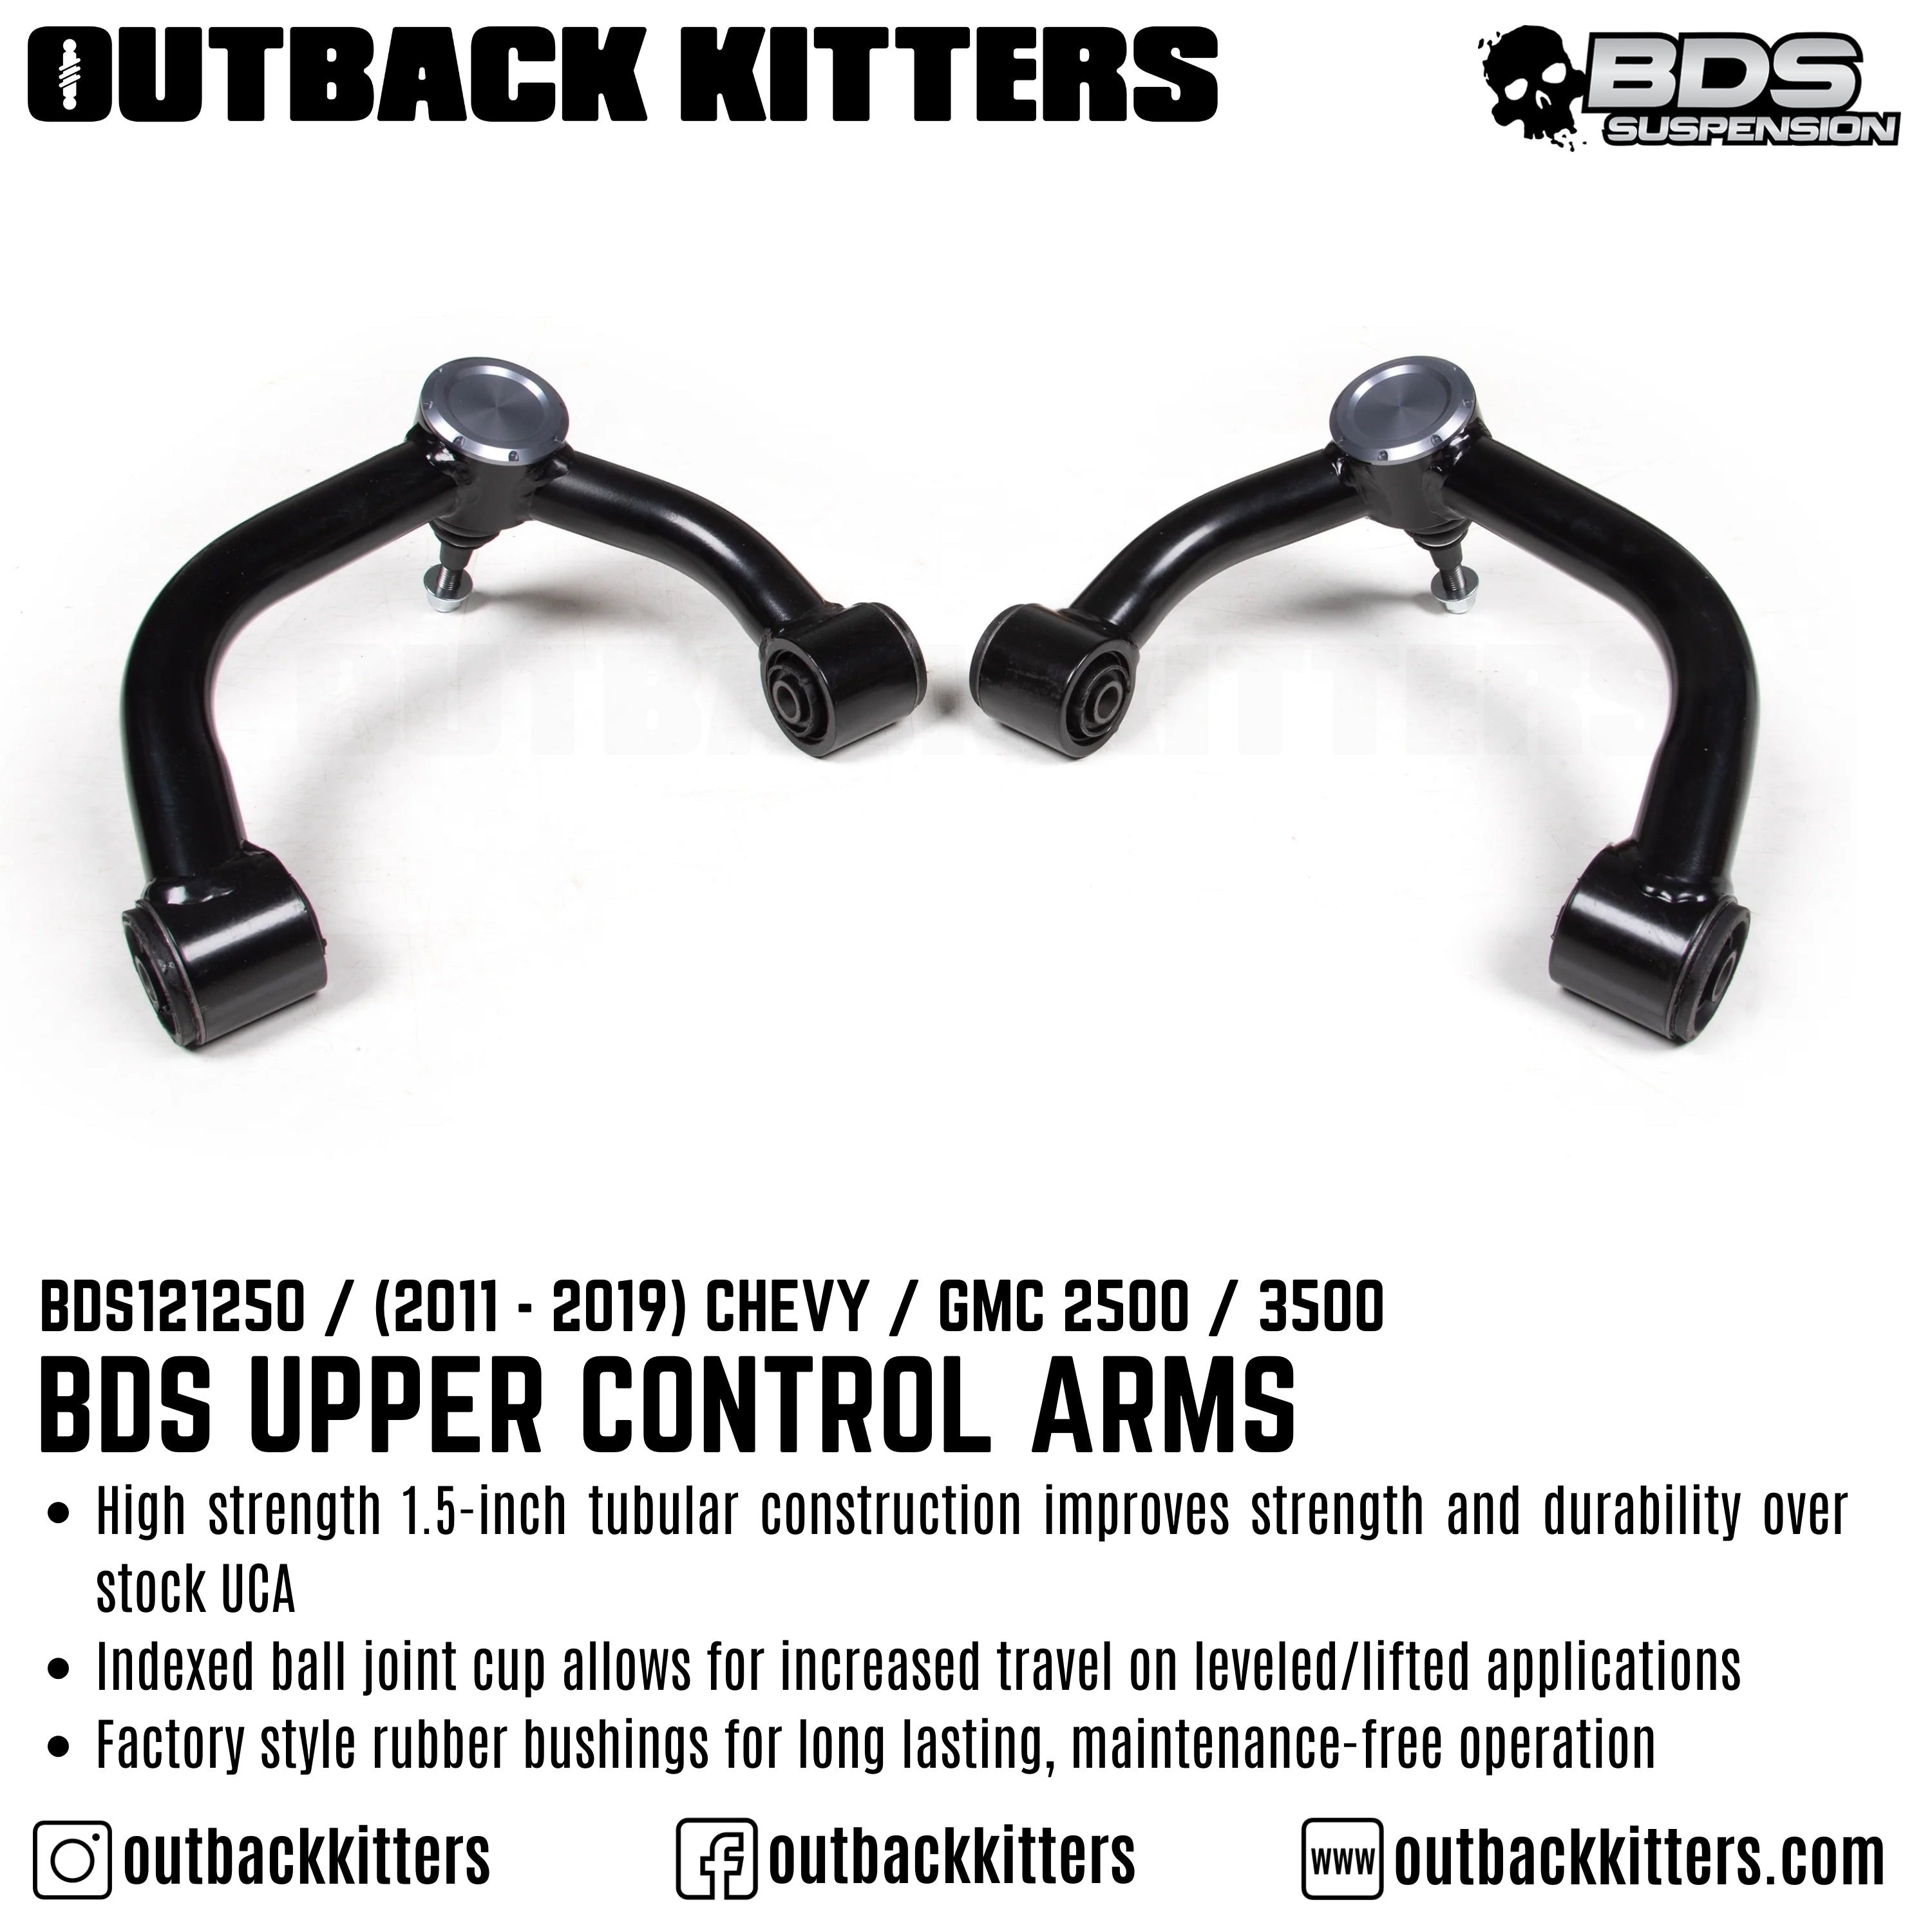 BDS Suspension Upper Control Arm Kit for 2011-2019 Chevy Silverado 2500 Lift Kits - Outback Kitters